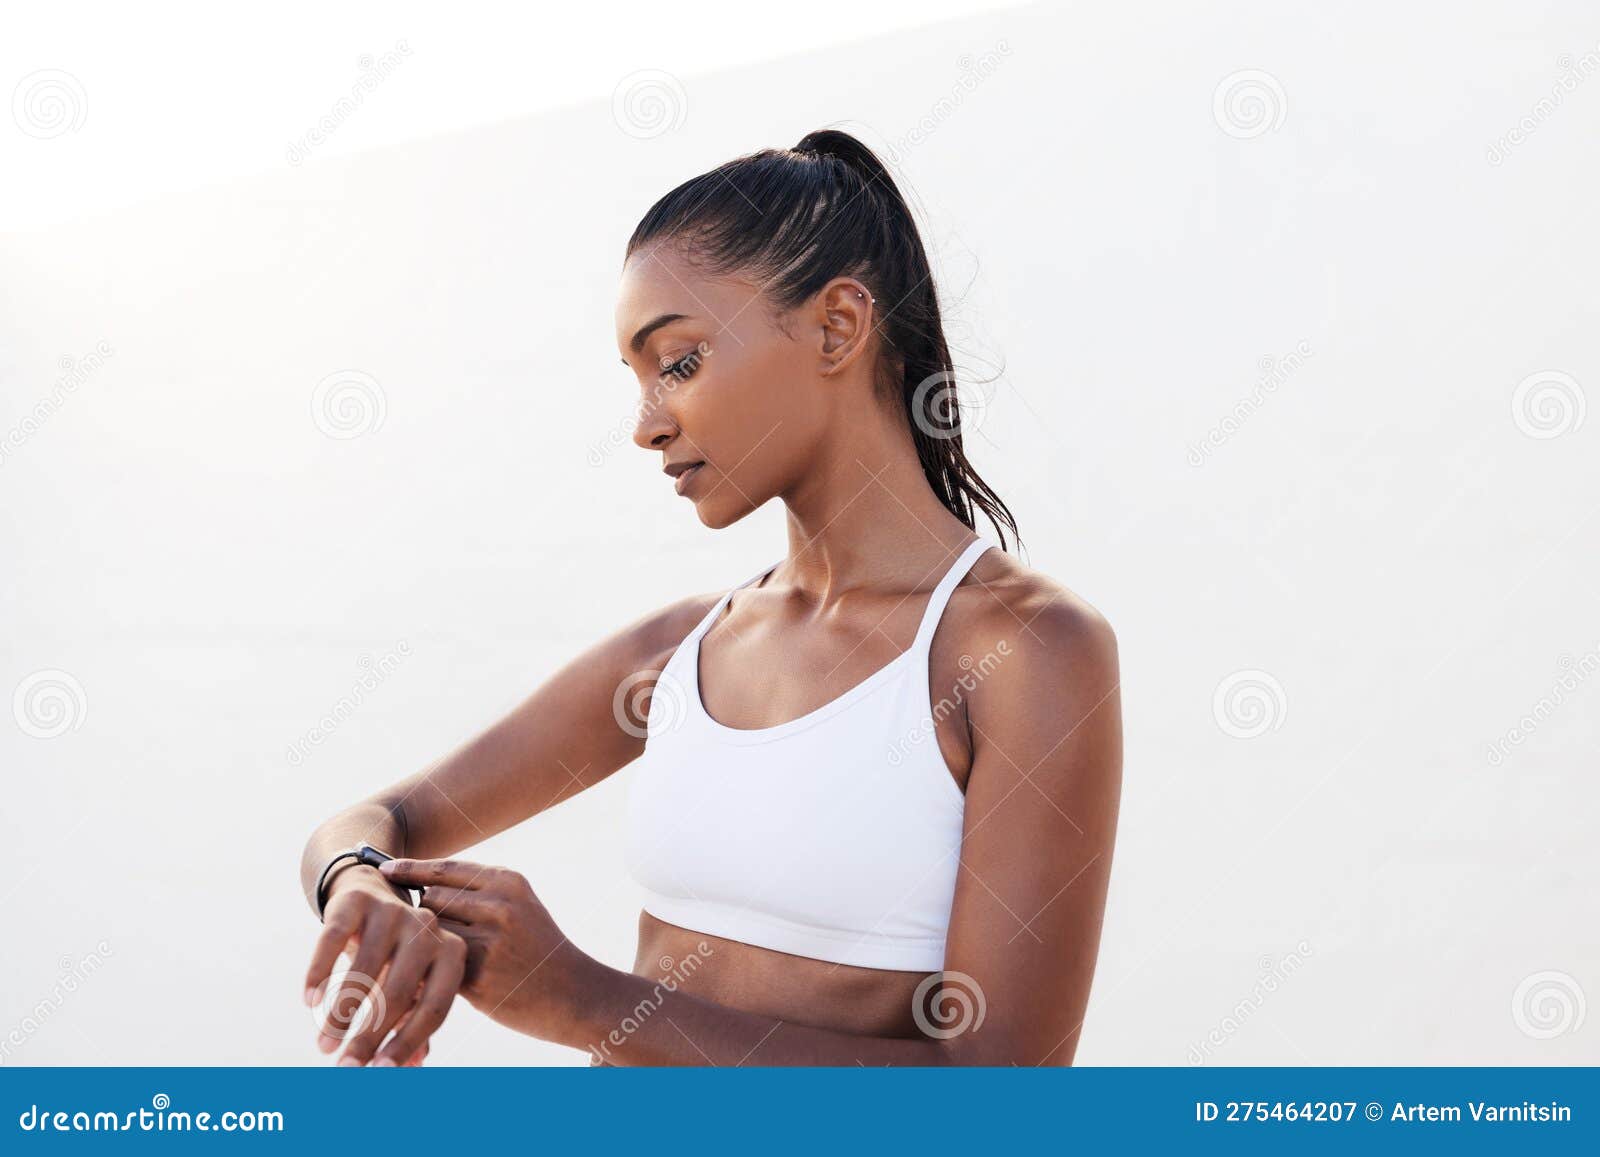 Fitness Female in White Sports Attire Adjusting Smartwatch before a Workout  Stock Image - Image of white, space: 275464207